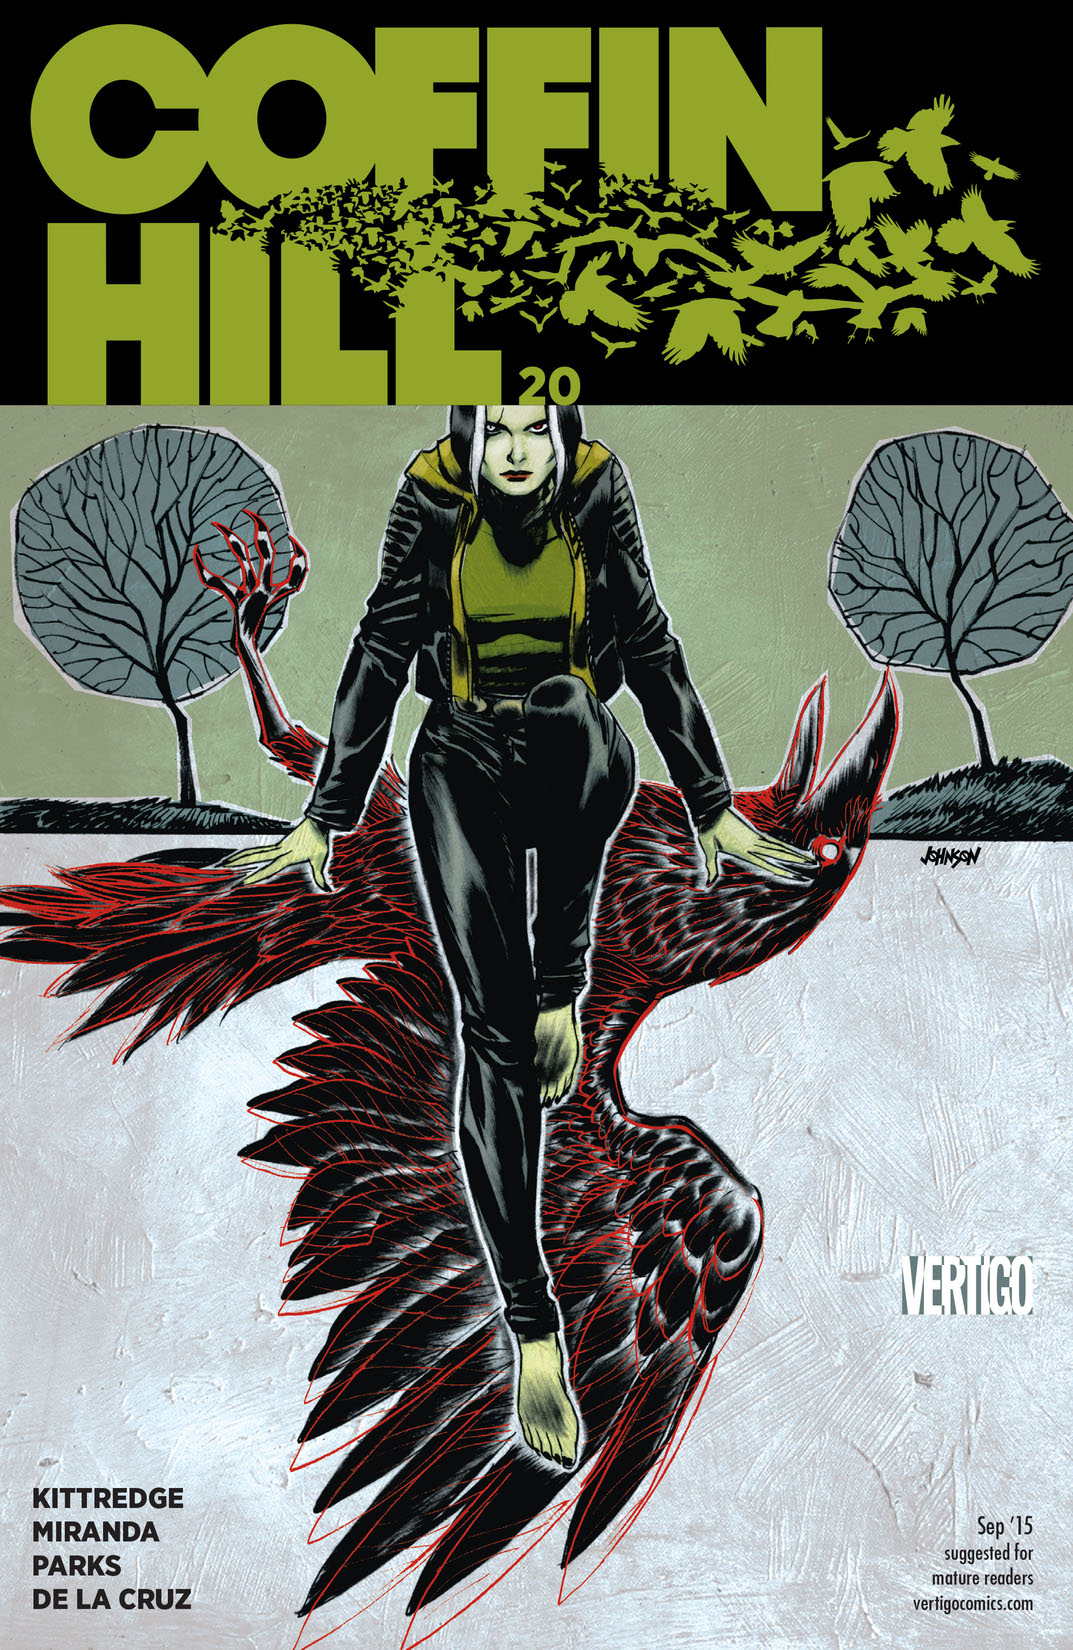 Coffin Hill #20 preview images